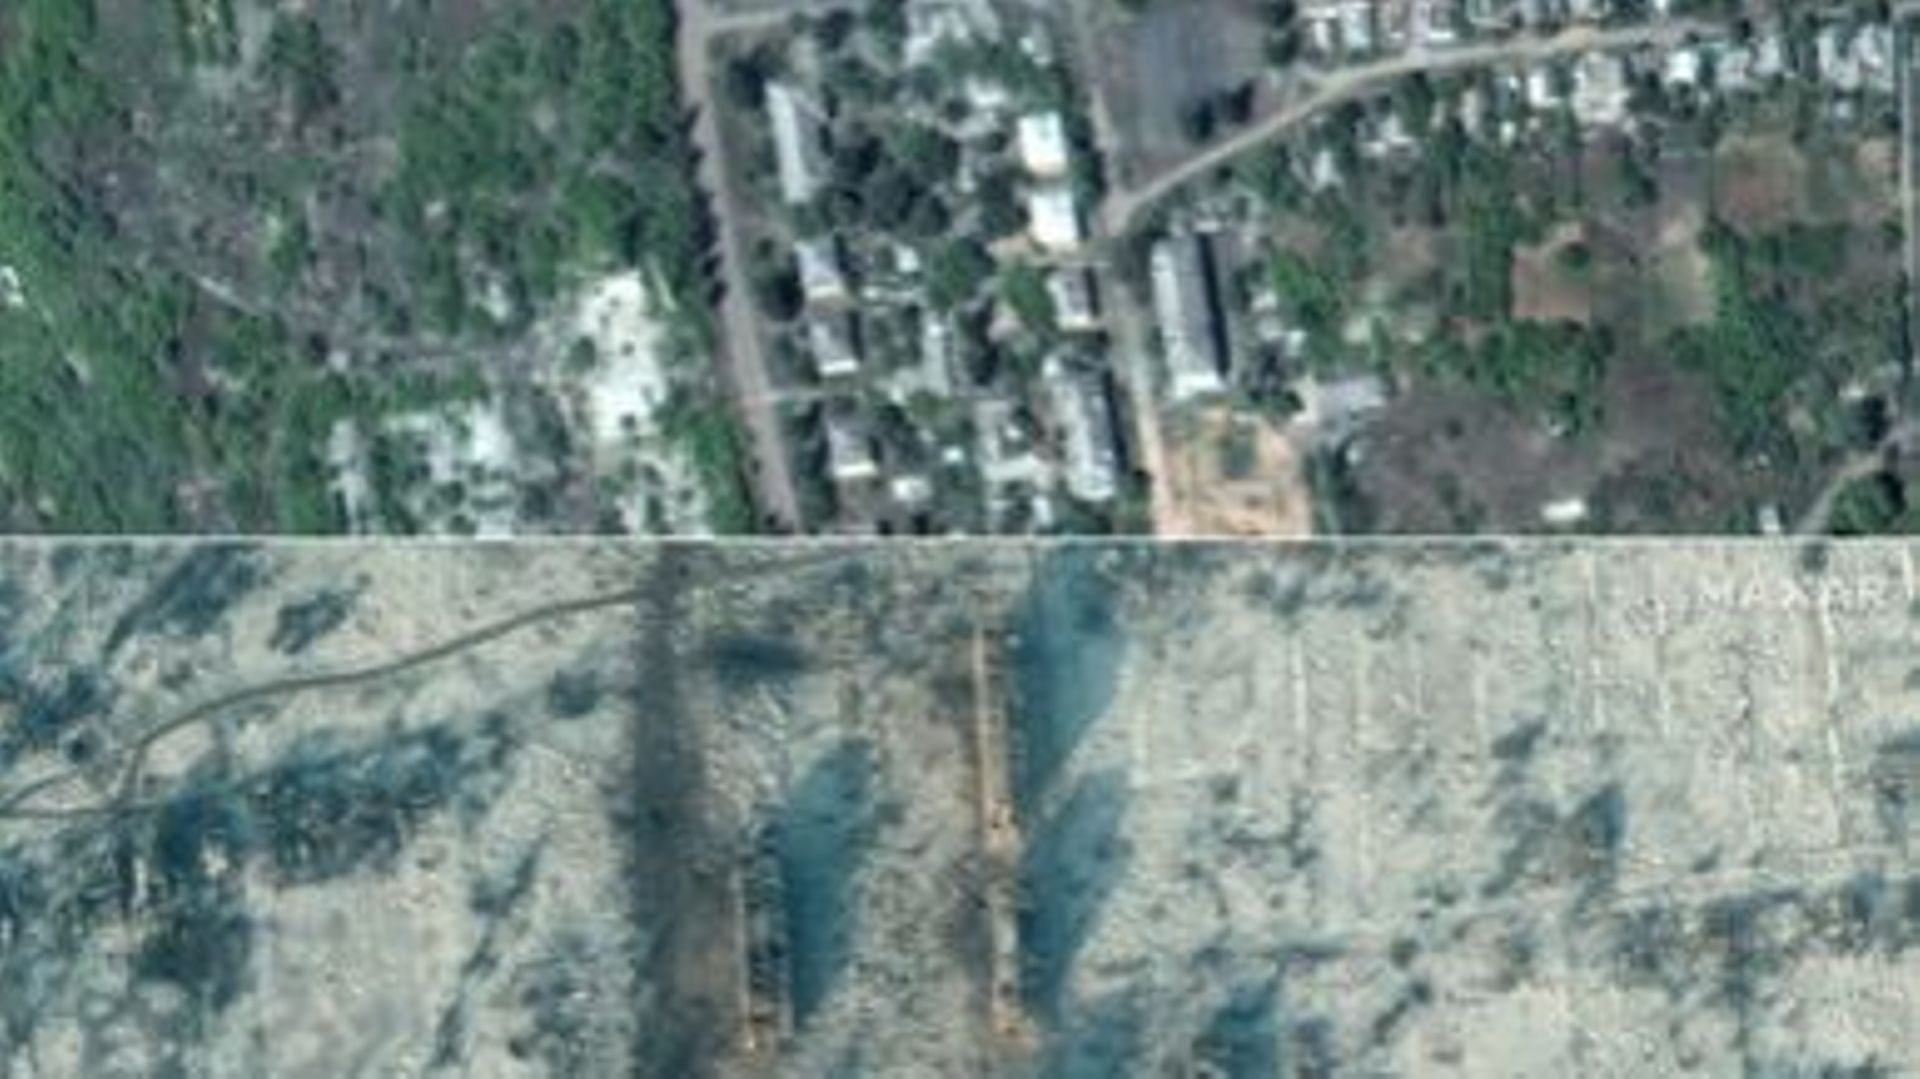 (COMBO) This combination of handout satellite images by Maxar Technologies shows the buildings and roads on August 1, 2022 (Top) and an image of destroyed buildings at the same location taken on January 10, 2023 (Bottom) in southern Soledar, near Bakhmut 